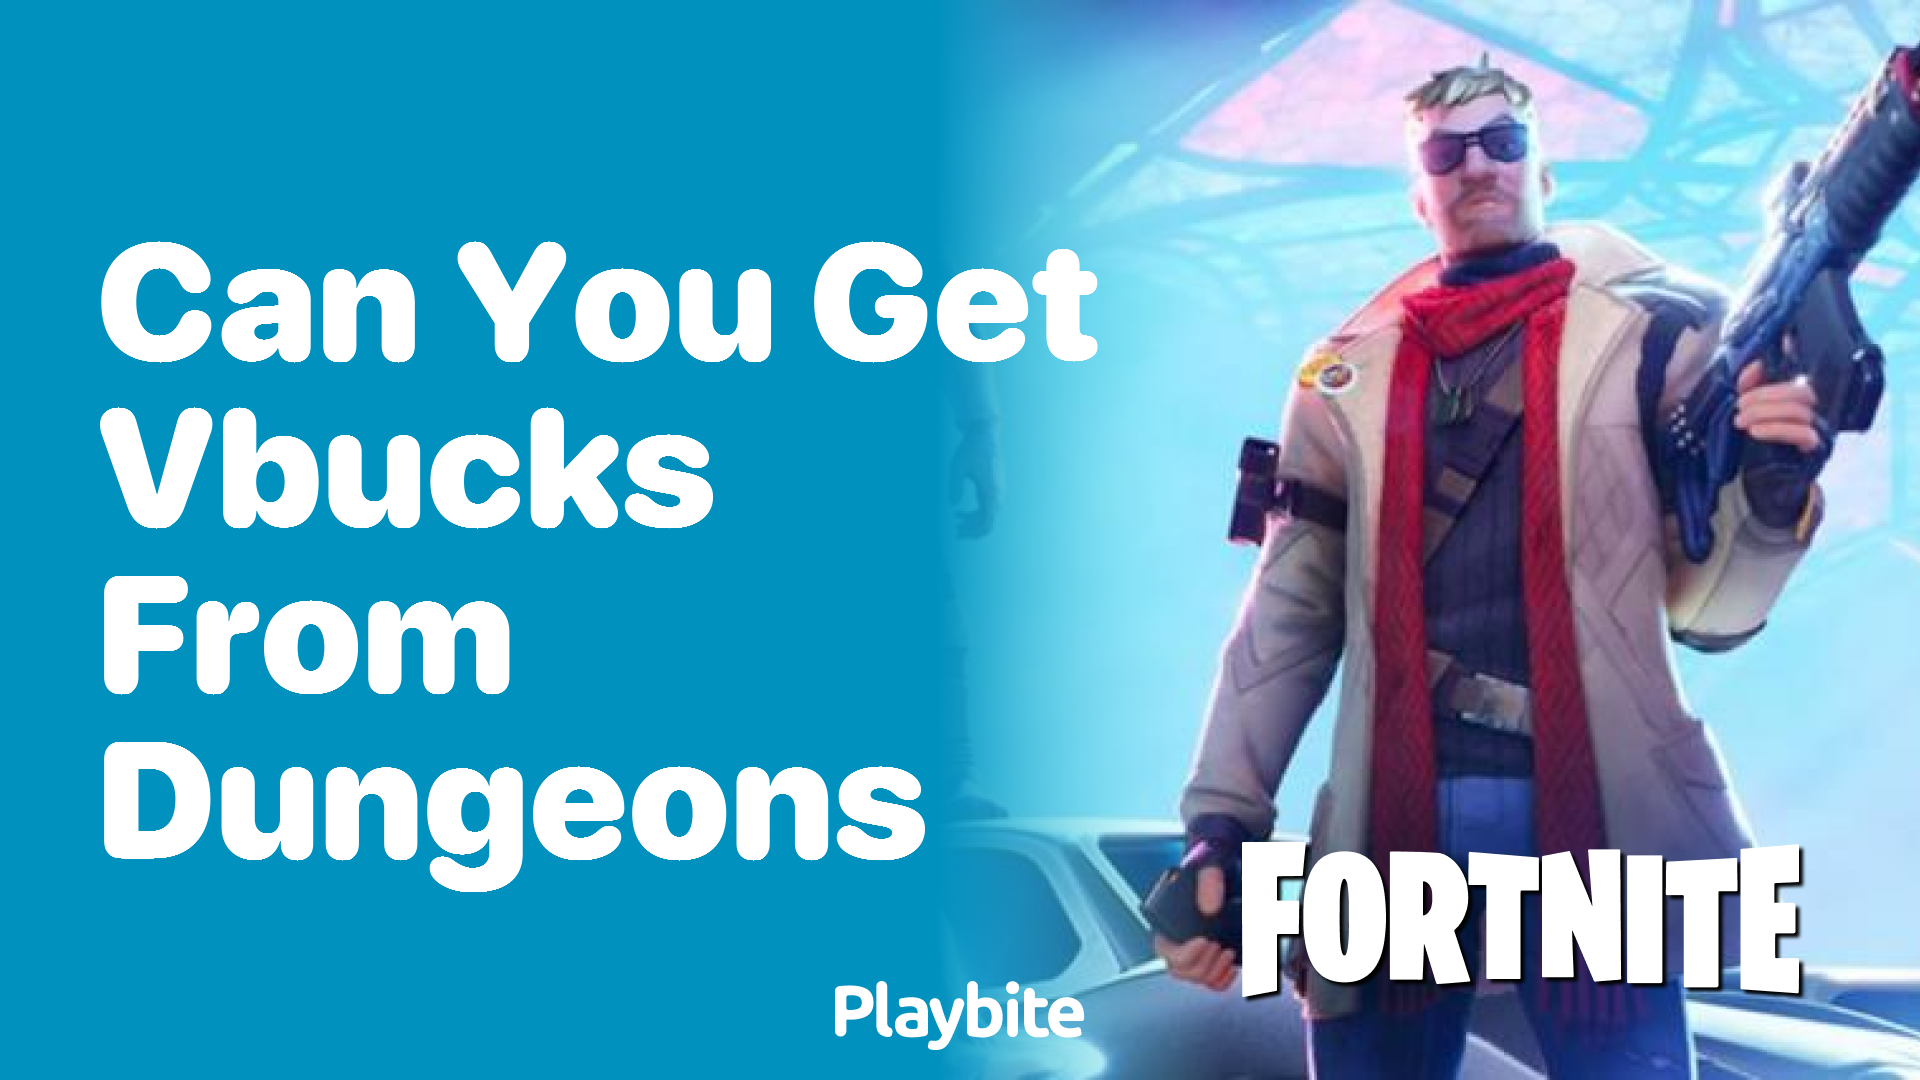 Can You Get V-Bucks from Dungeons in Fortnite?